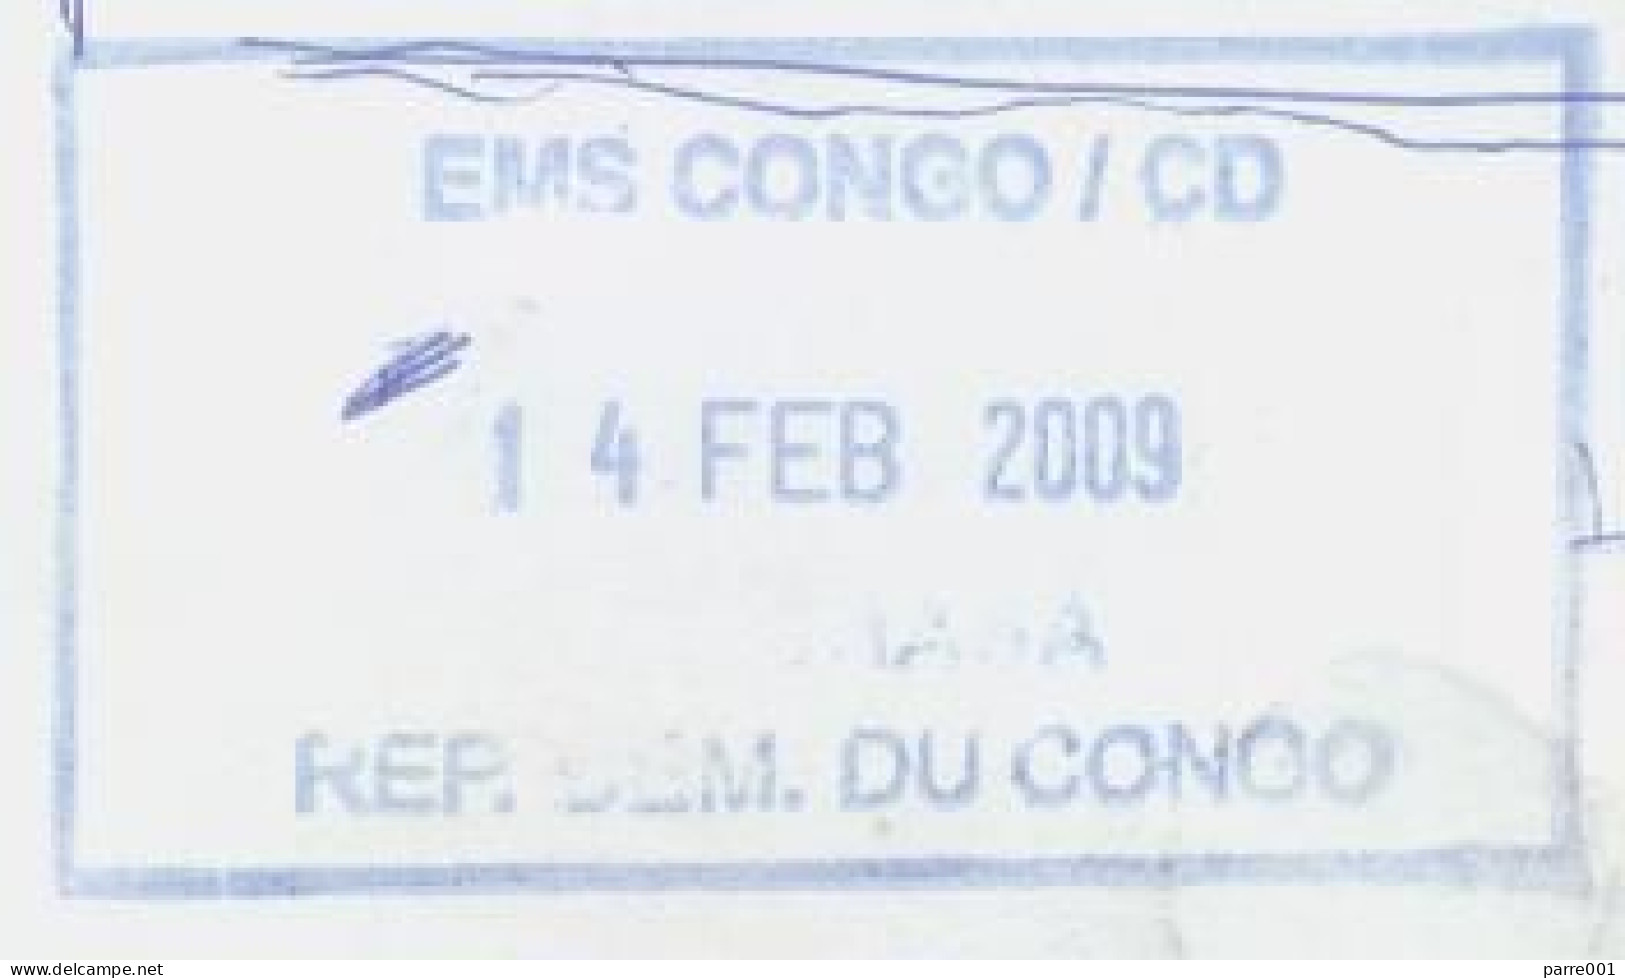 DRC Congo 2009 Beni EMS Label Kinshasa Via Goma With CAA Airline Includes Lead Sealing Weight. Rare - Covers